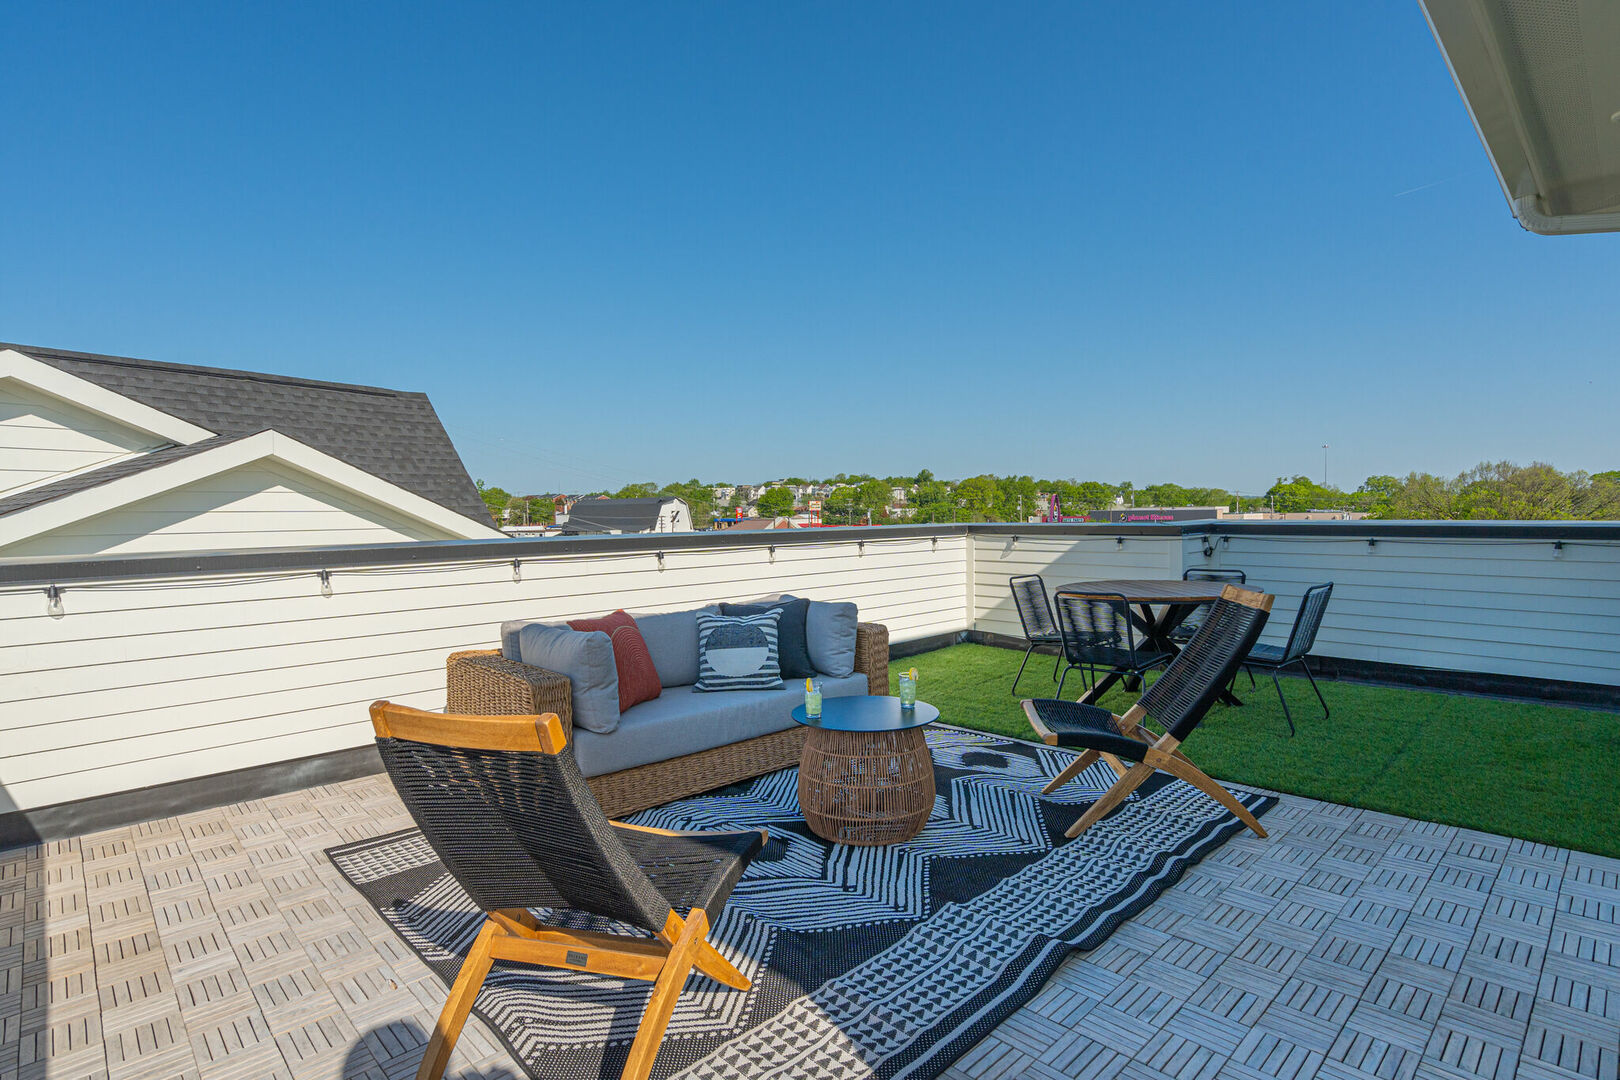 2nd Unit, 4th Floor: Rooftop deck with multiple lounging areas and views!